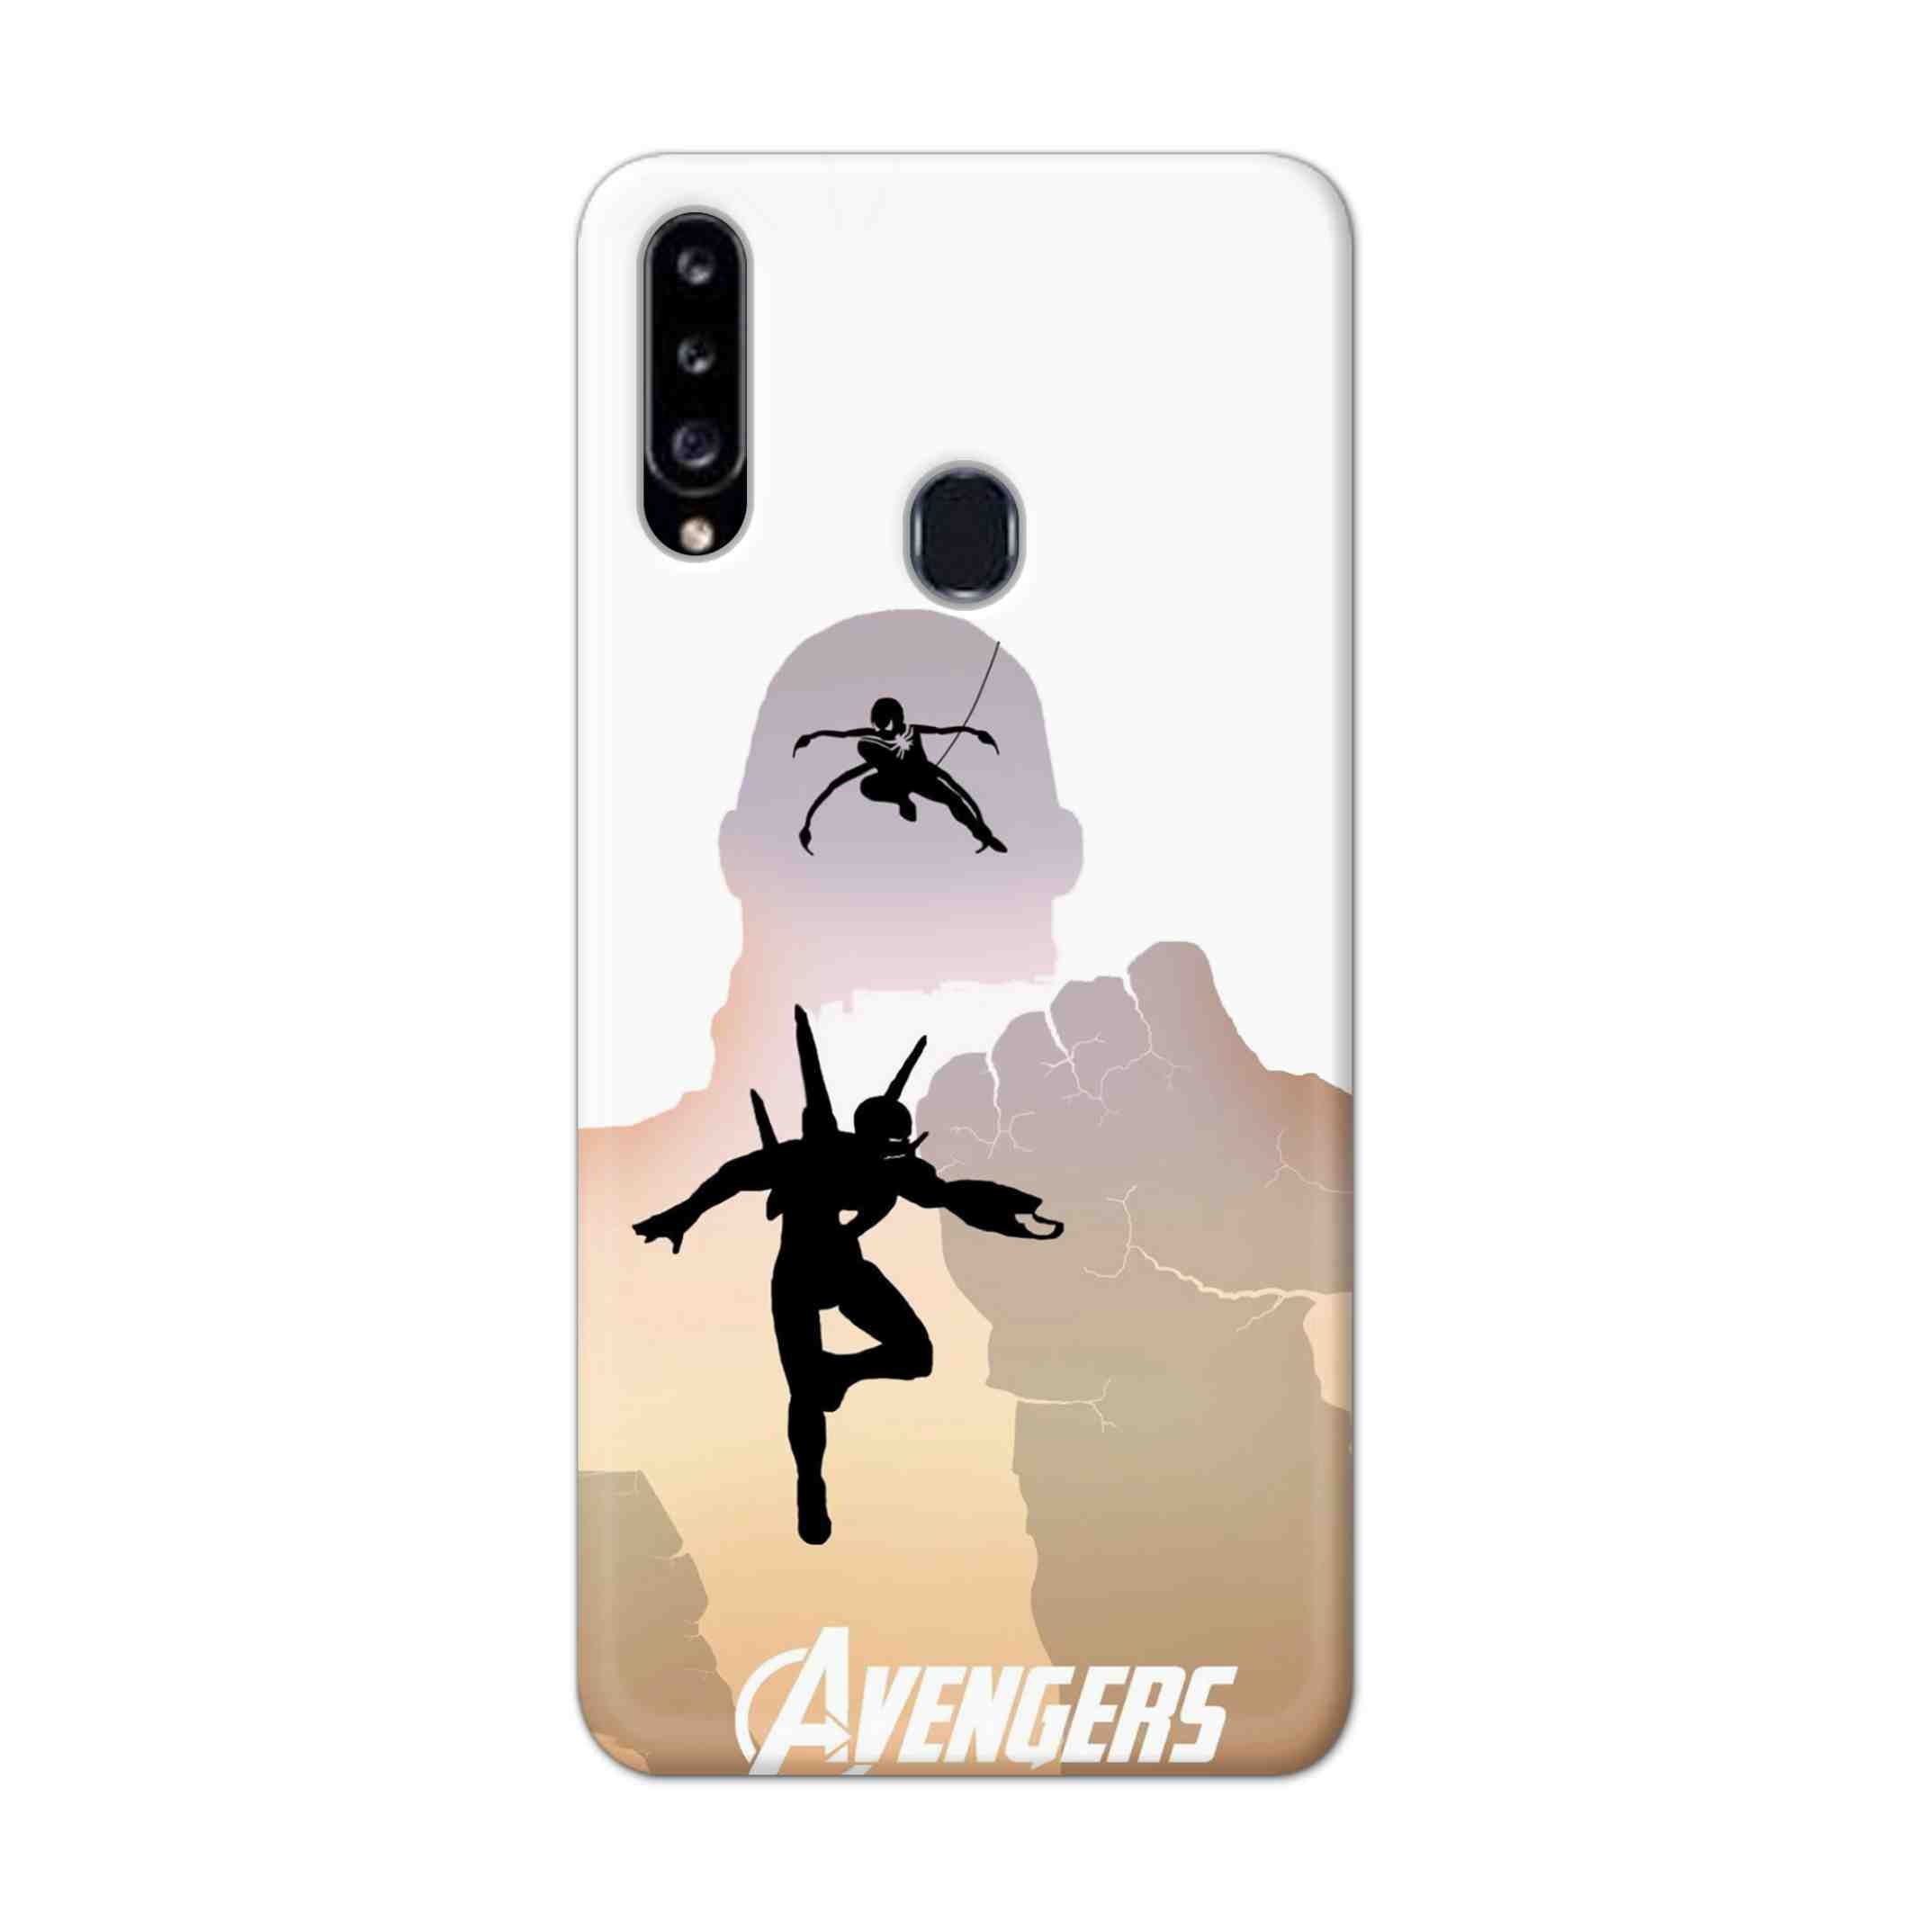 Buy Iron Man Vs Spiderman Hard Back Mobile Phone Case Cover For Samsung Galaxy A21 Online